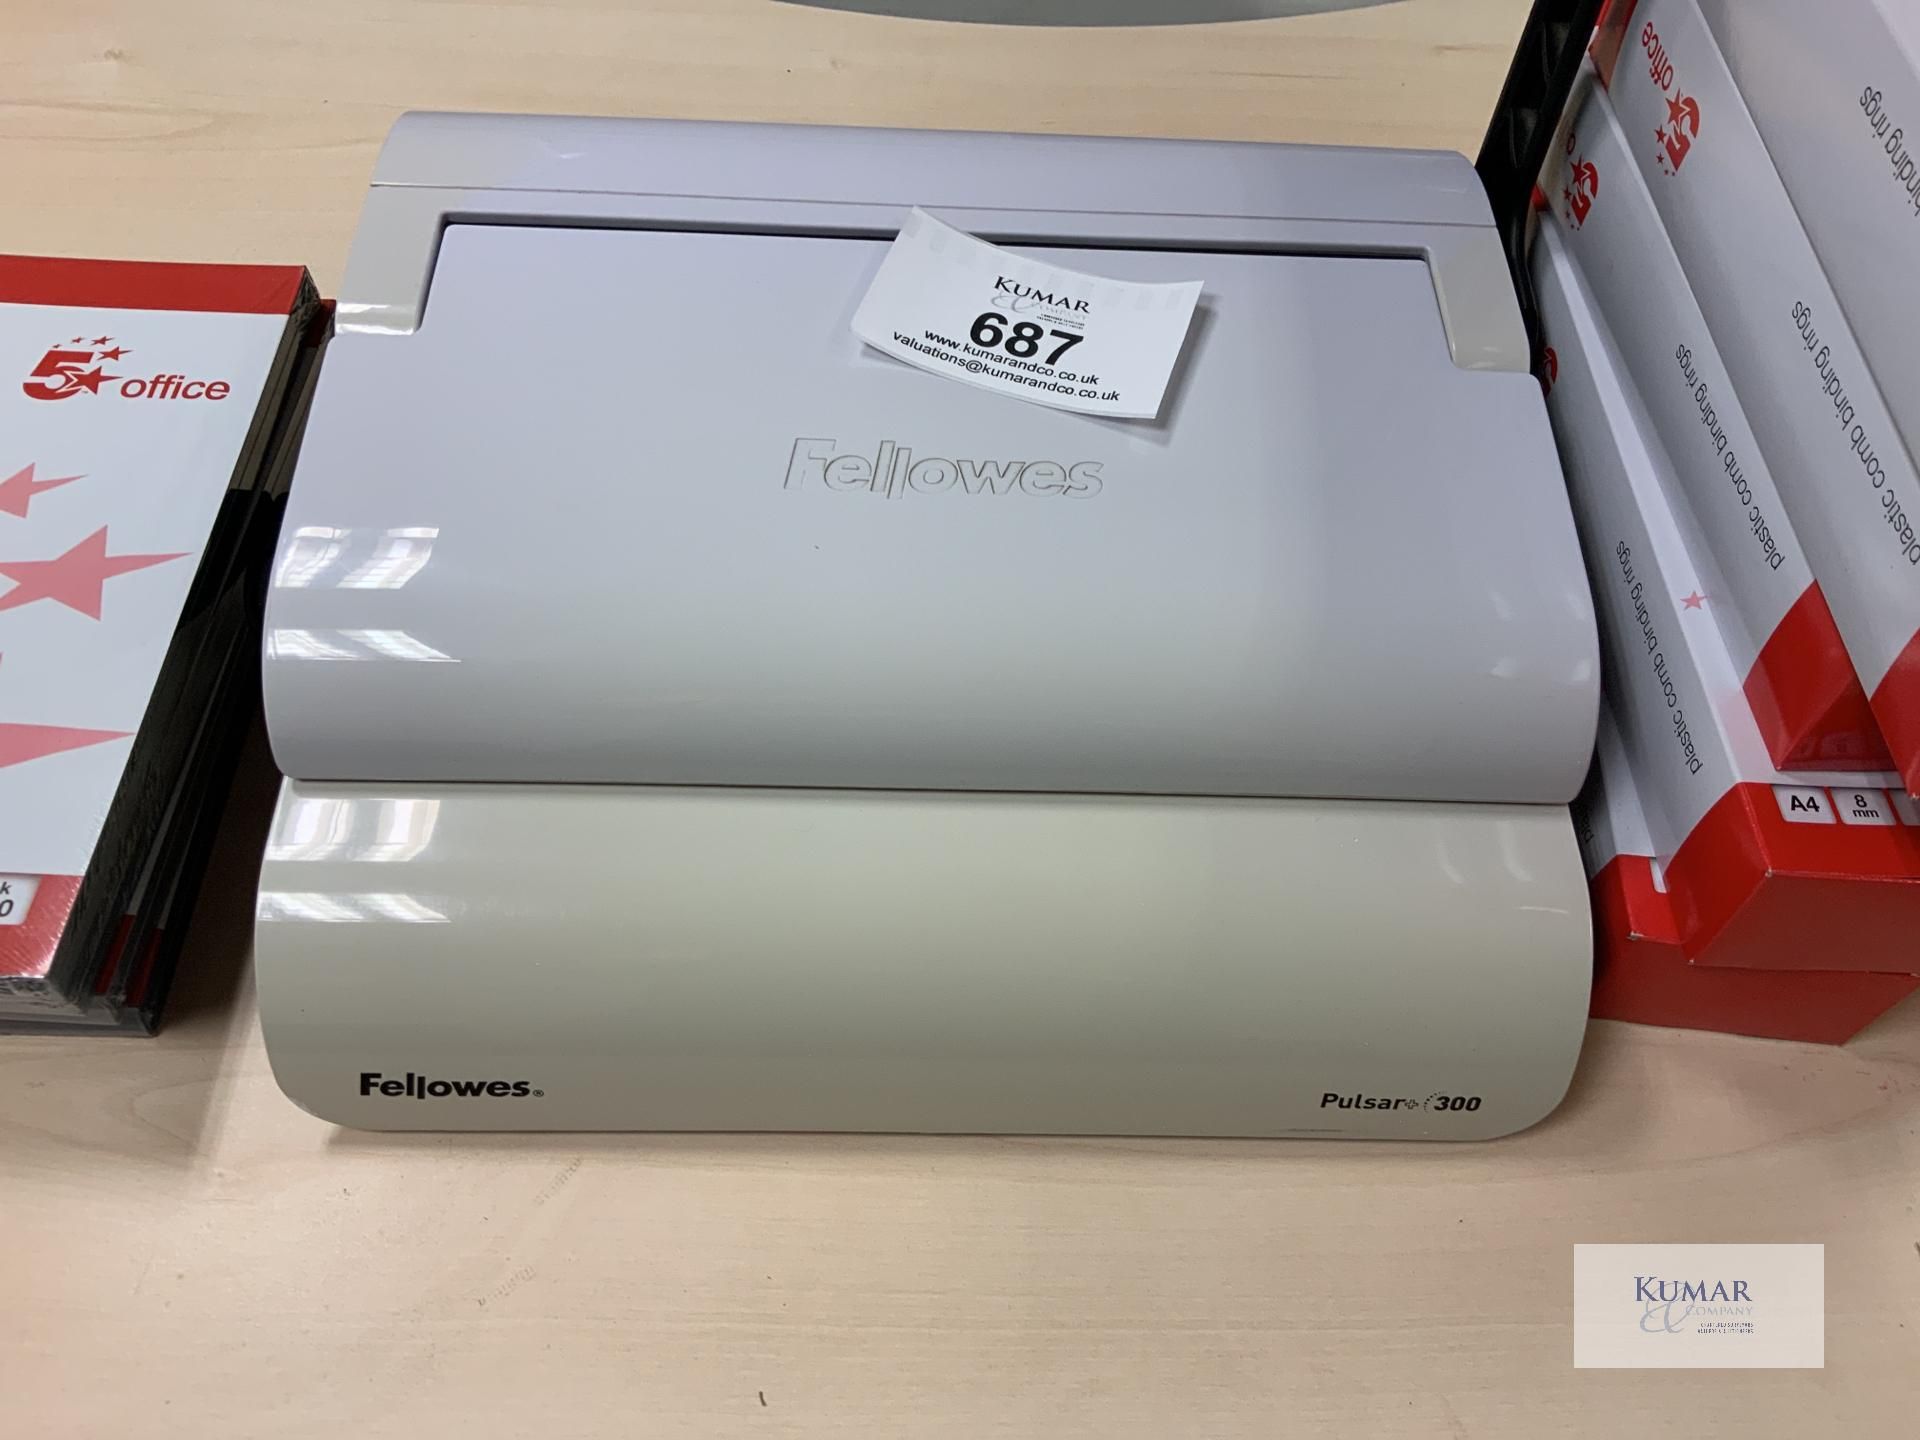 Fellowes Pulsar + 300 Ring Binder with binders and covers - Image 2 of 4